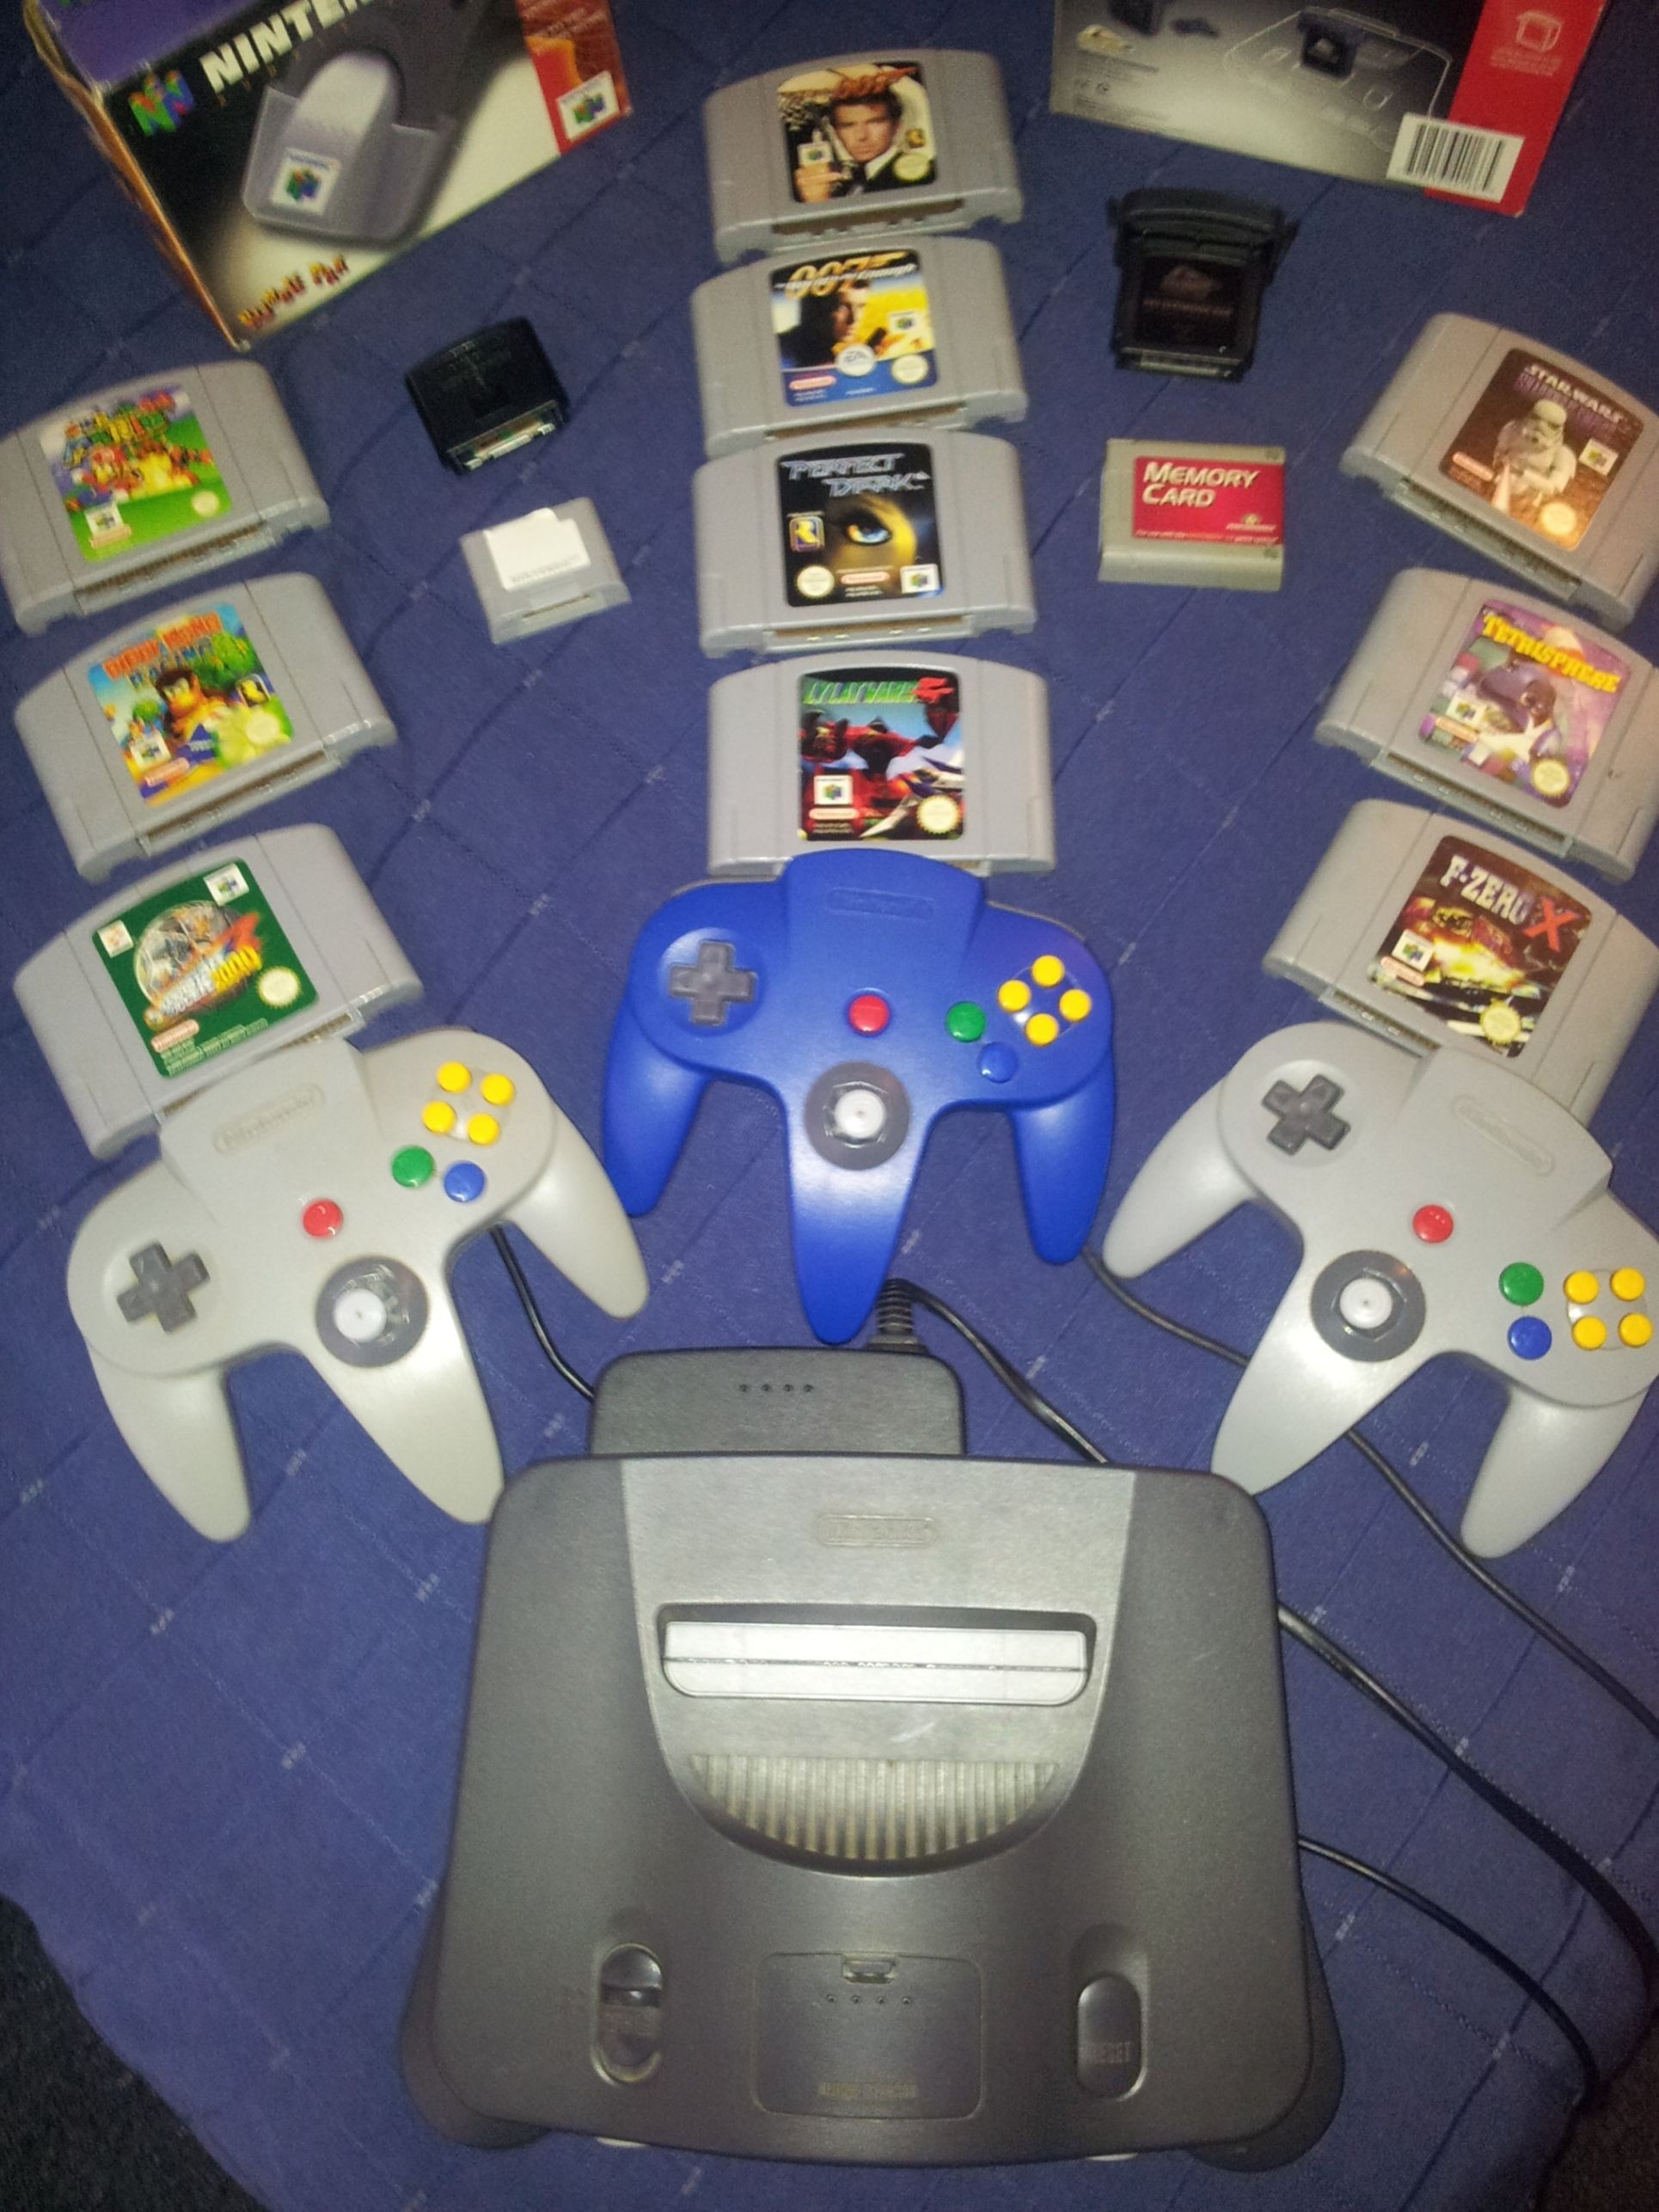 Nintendo Papercraft Nintendo 64 Console & Games In Houston Cook89 Hotmail S Garage